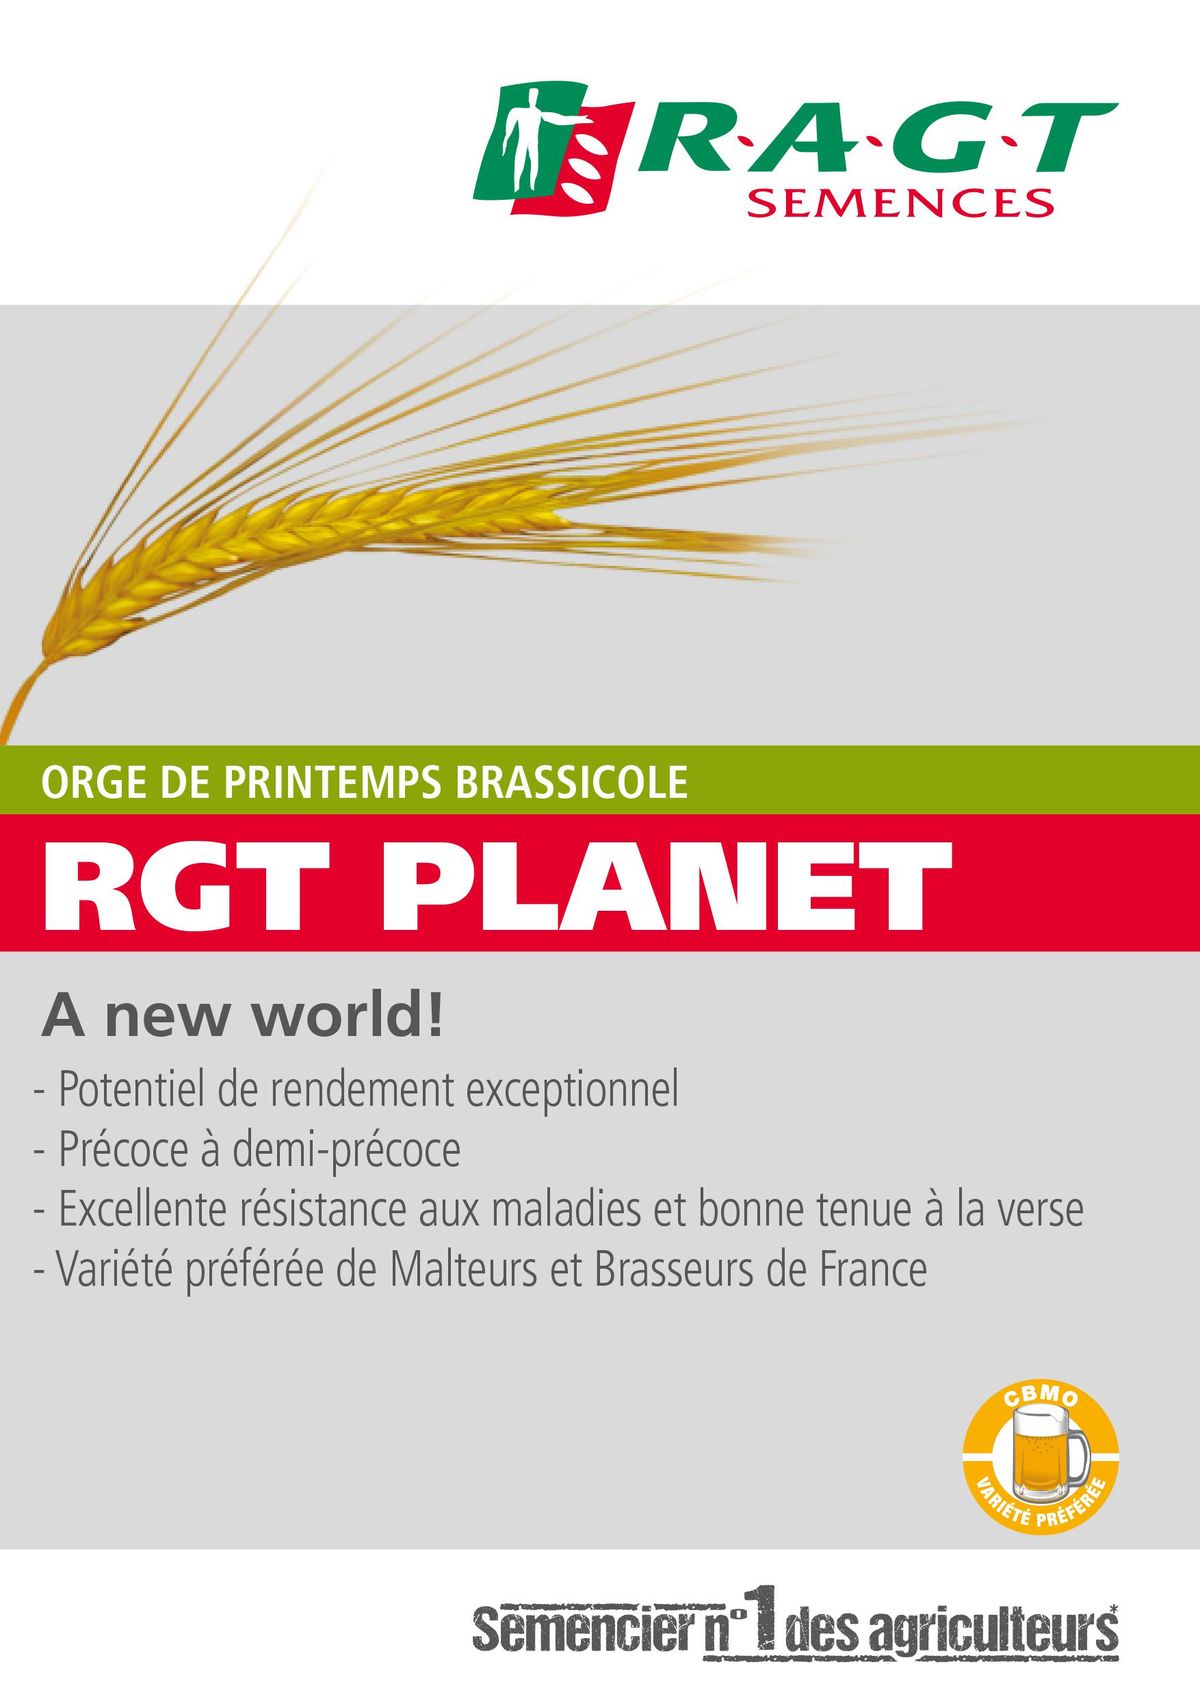 Catalogue RGT planet a new world, page 00004